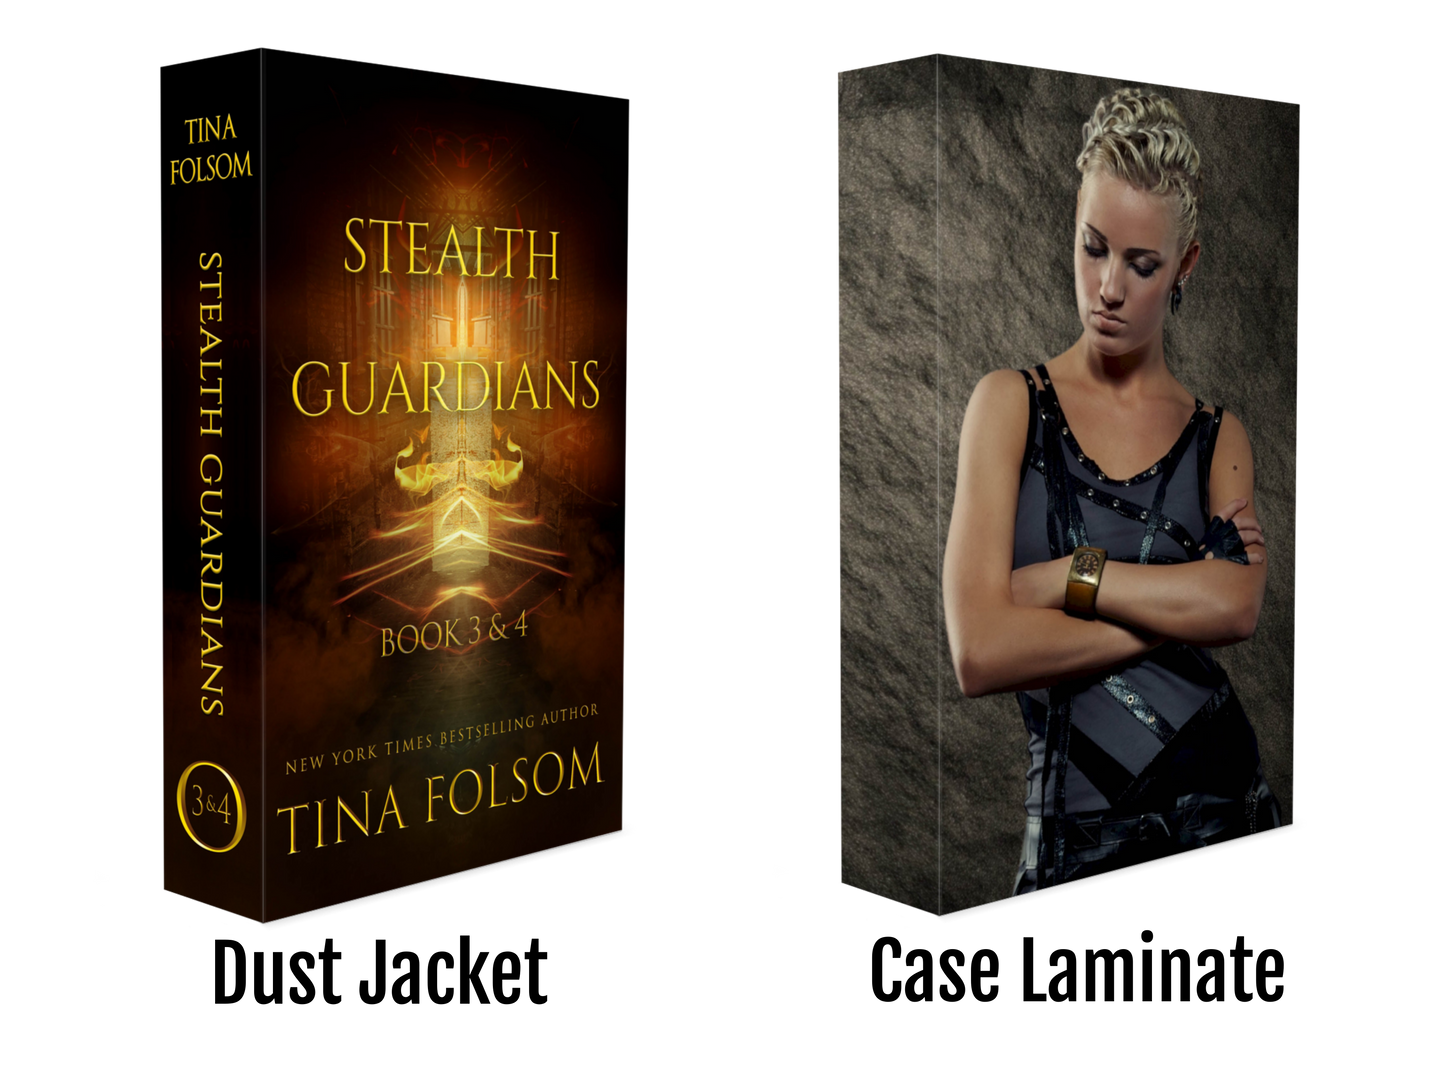 Stealth Guardians (Book 3 & 4)